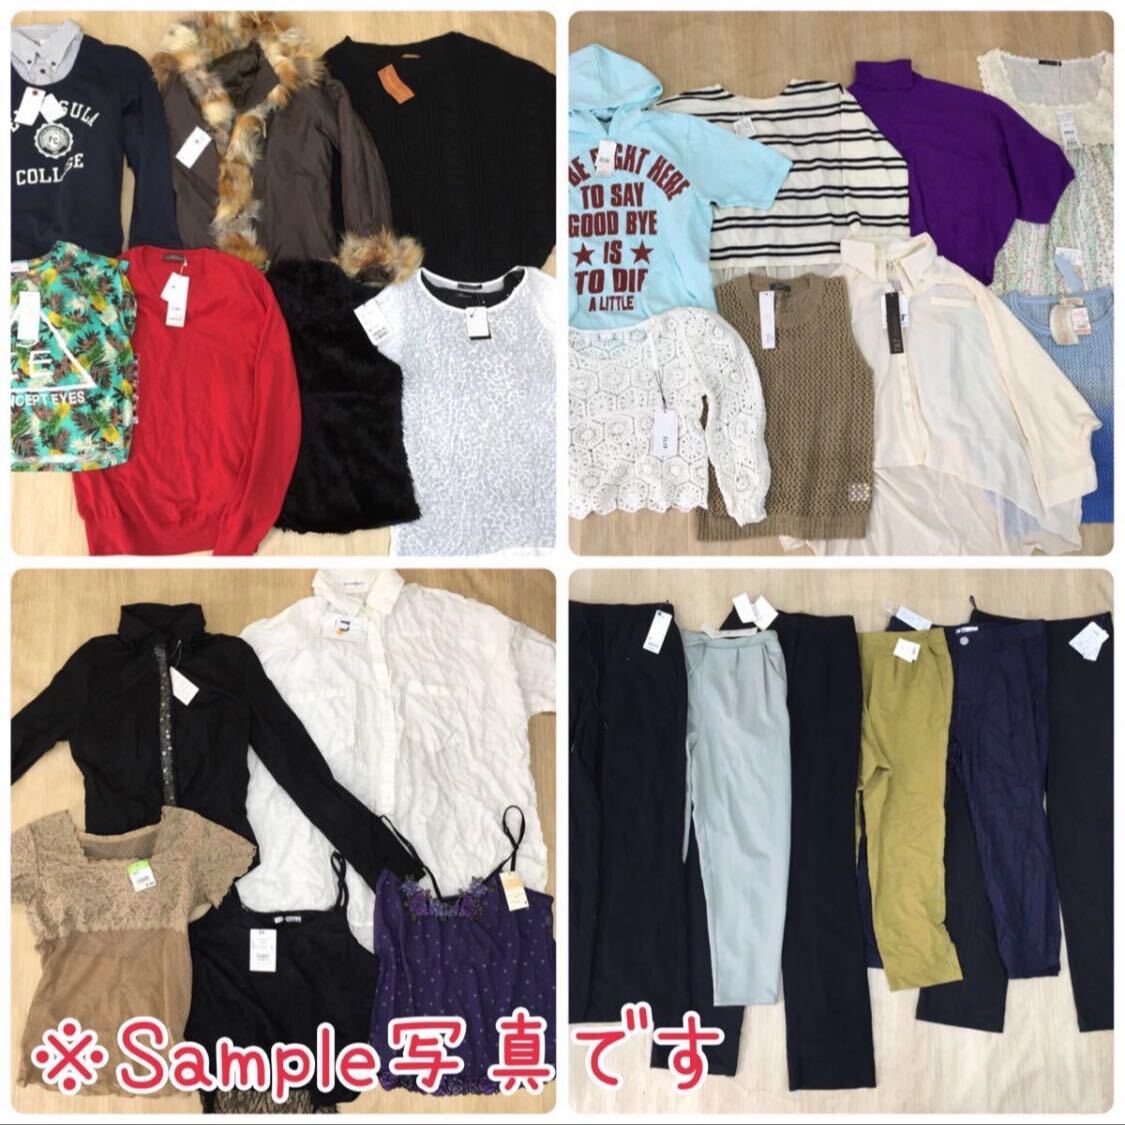 M5-32# lady's unused tag attaching set sale 50 point set size various tops bottoms other woman clothes lucky bag dealer large amount stock .